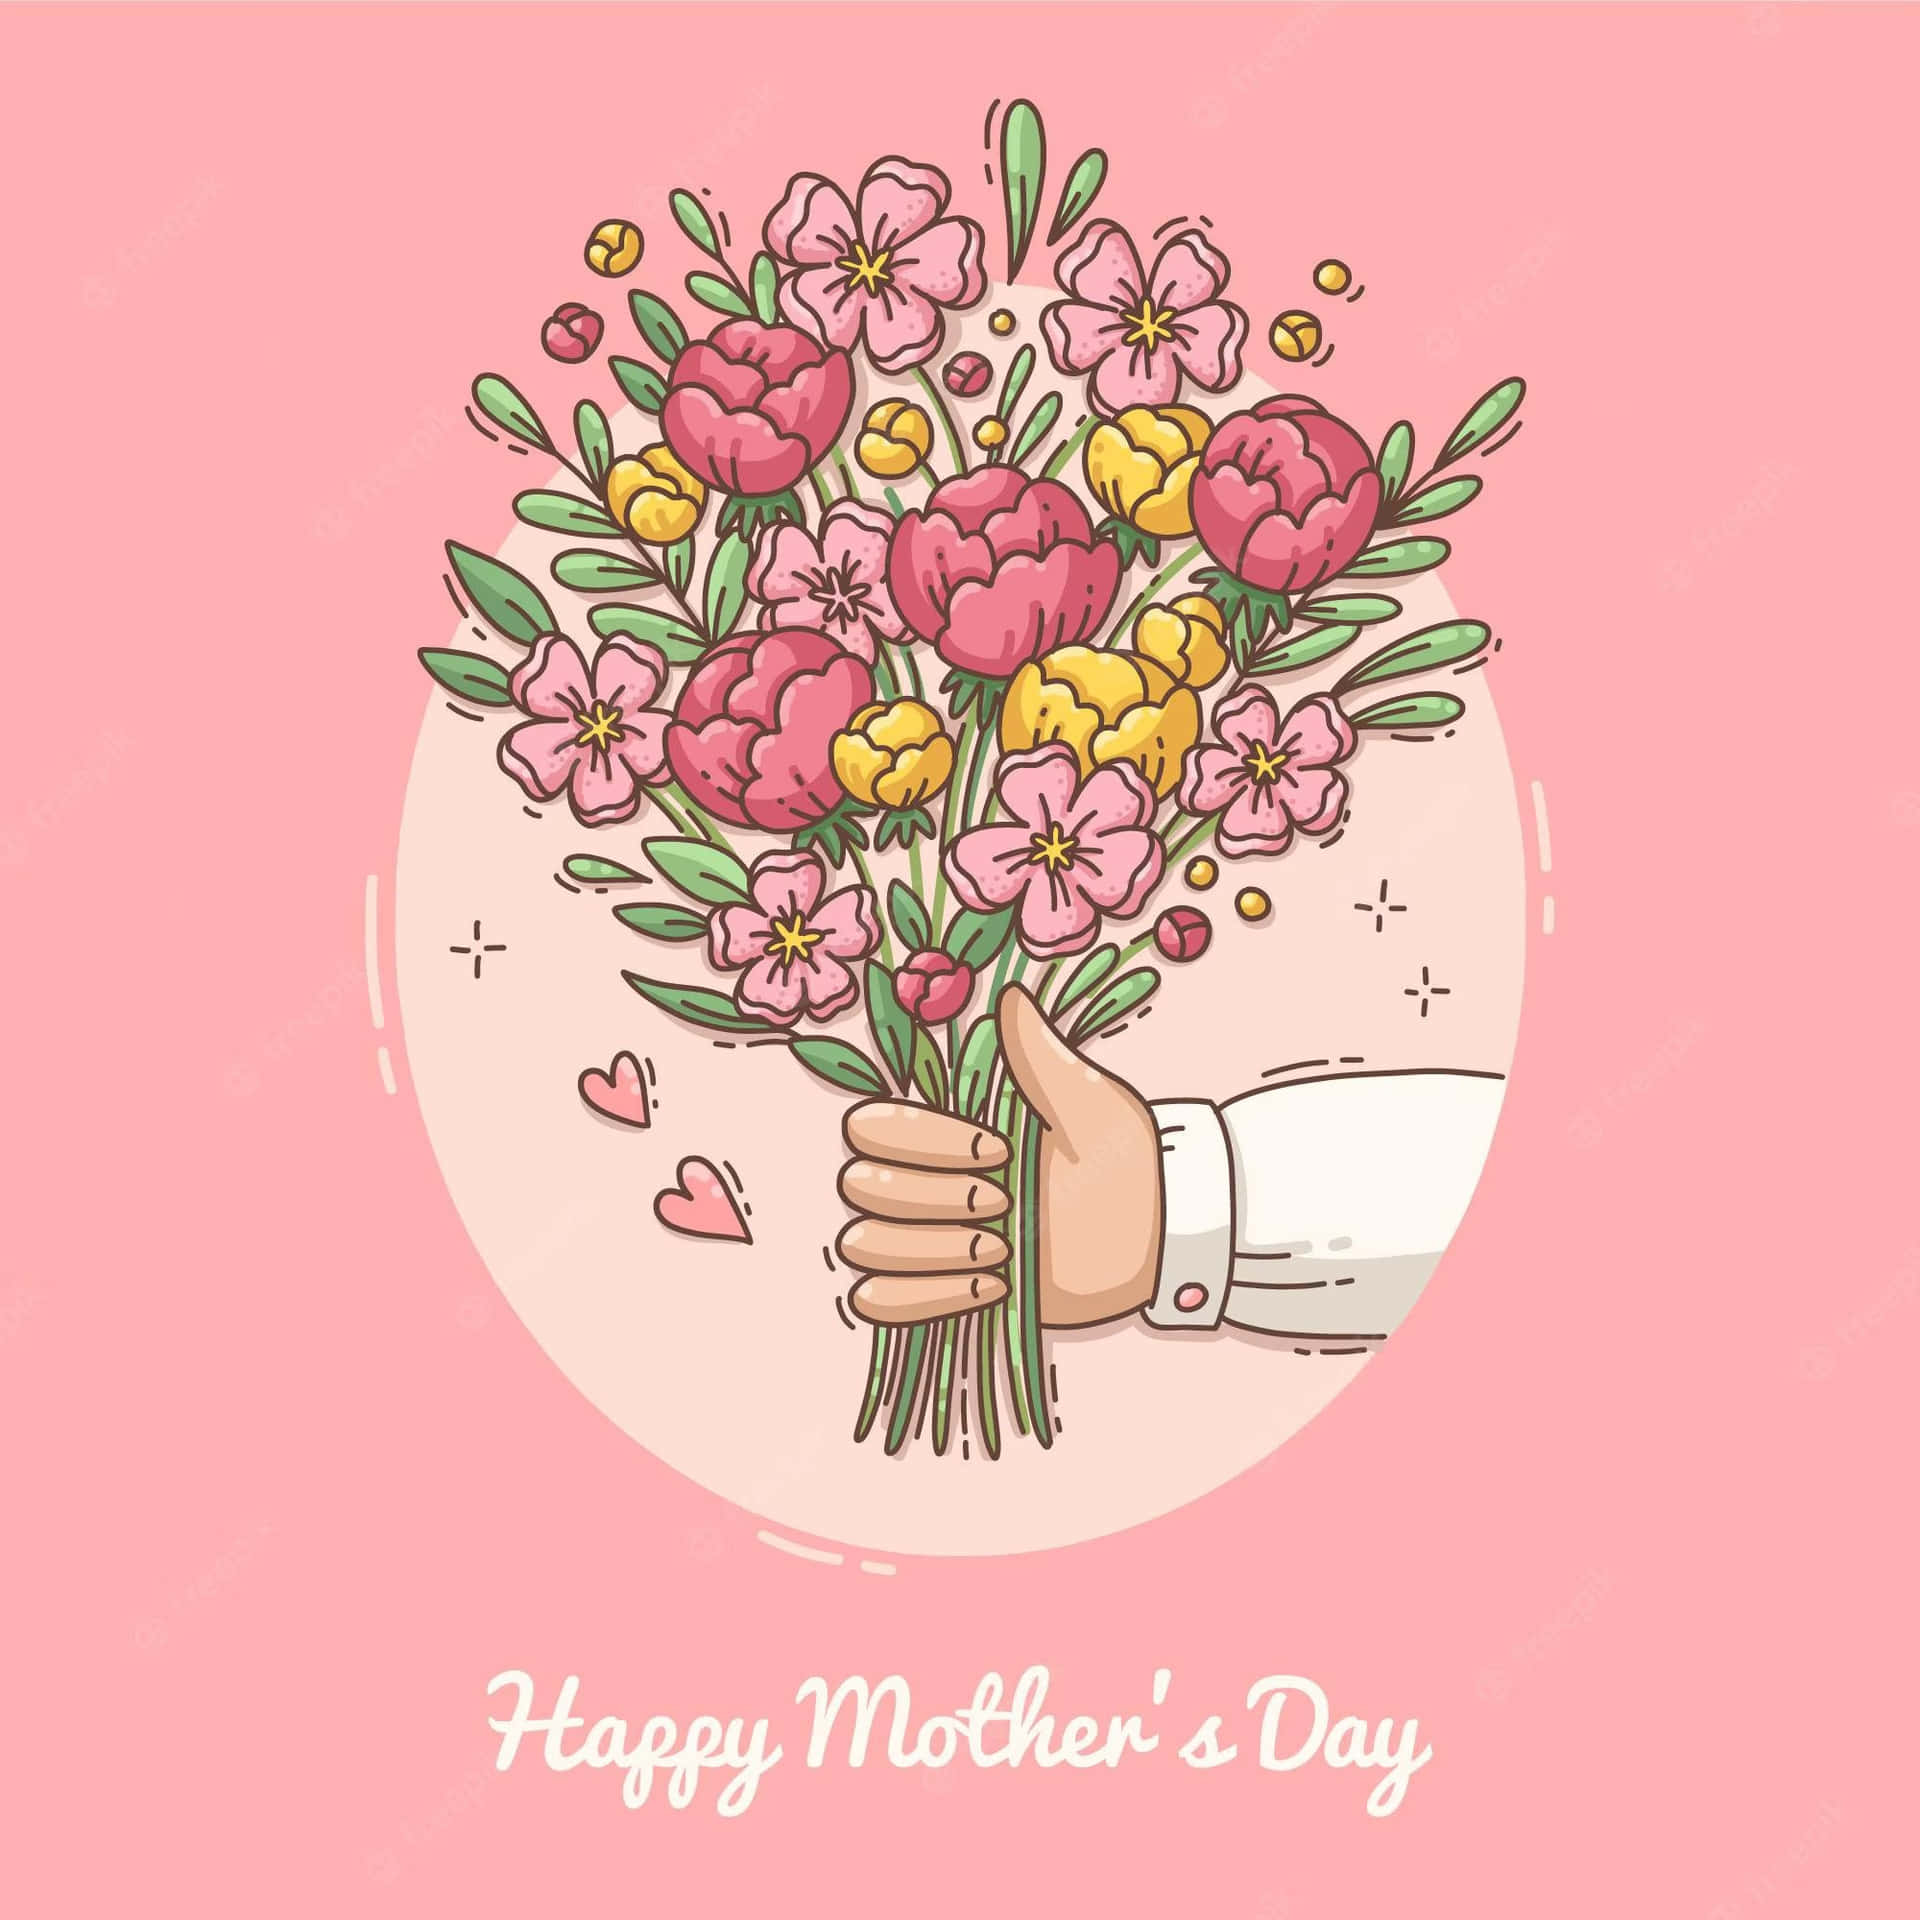 Happy Mother's Day Card With Hand Holding A Bouquet Of Flowers